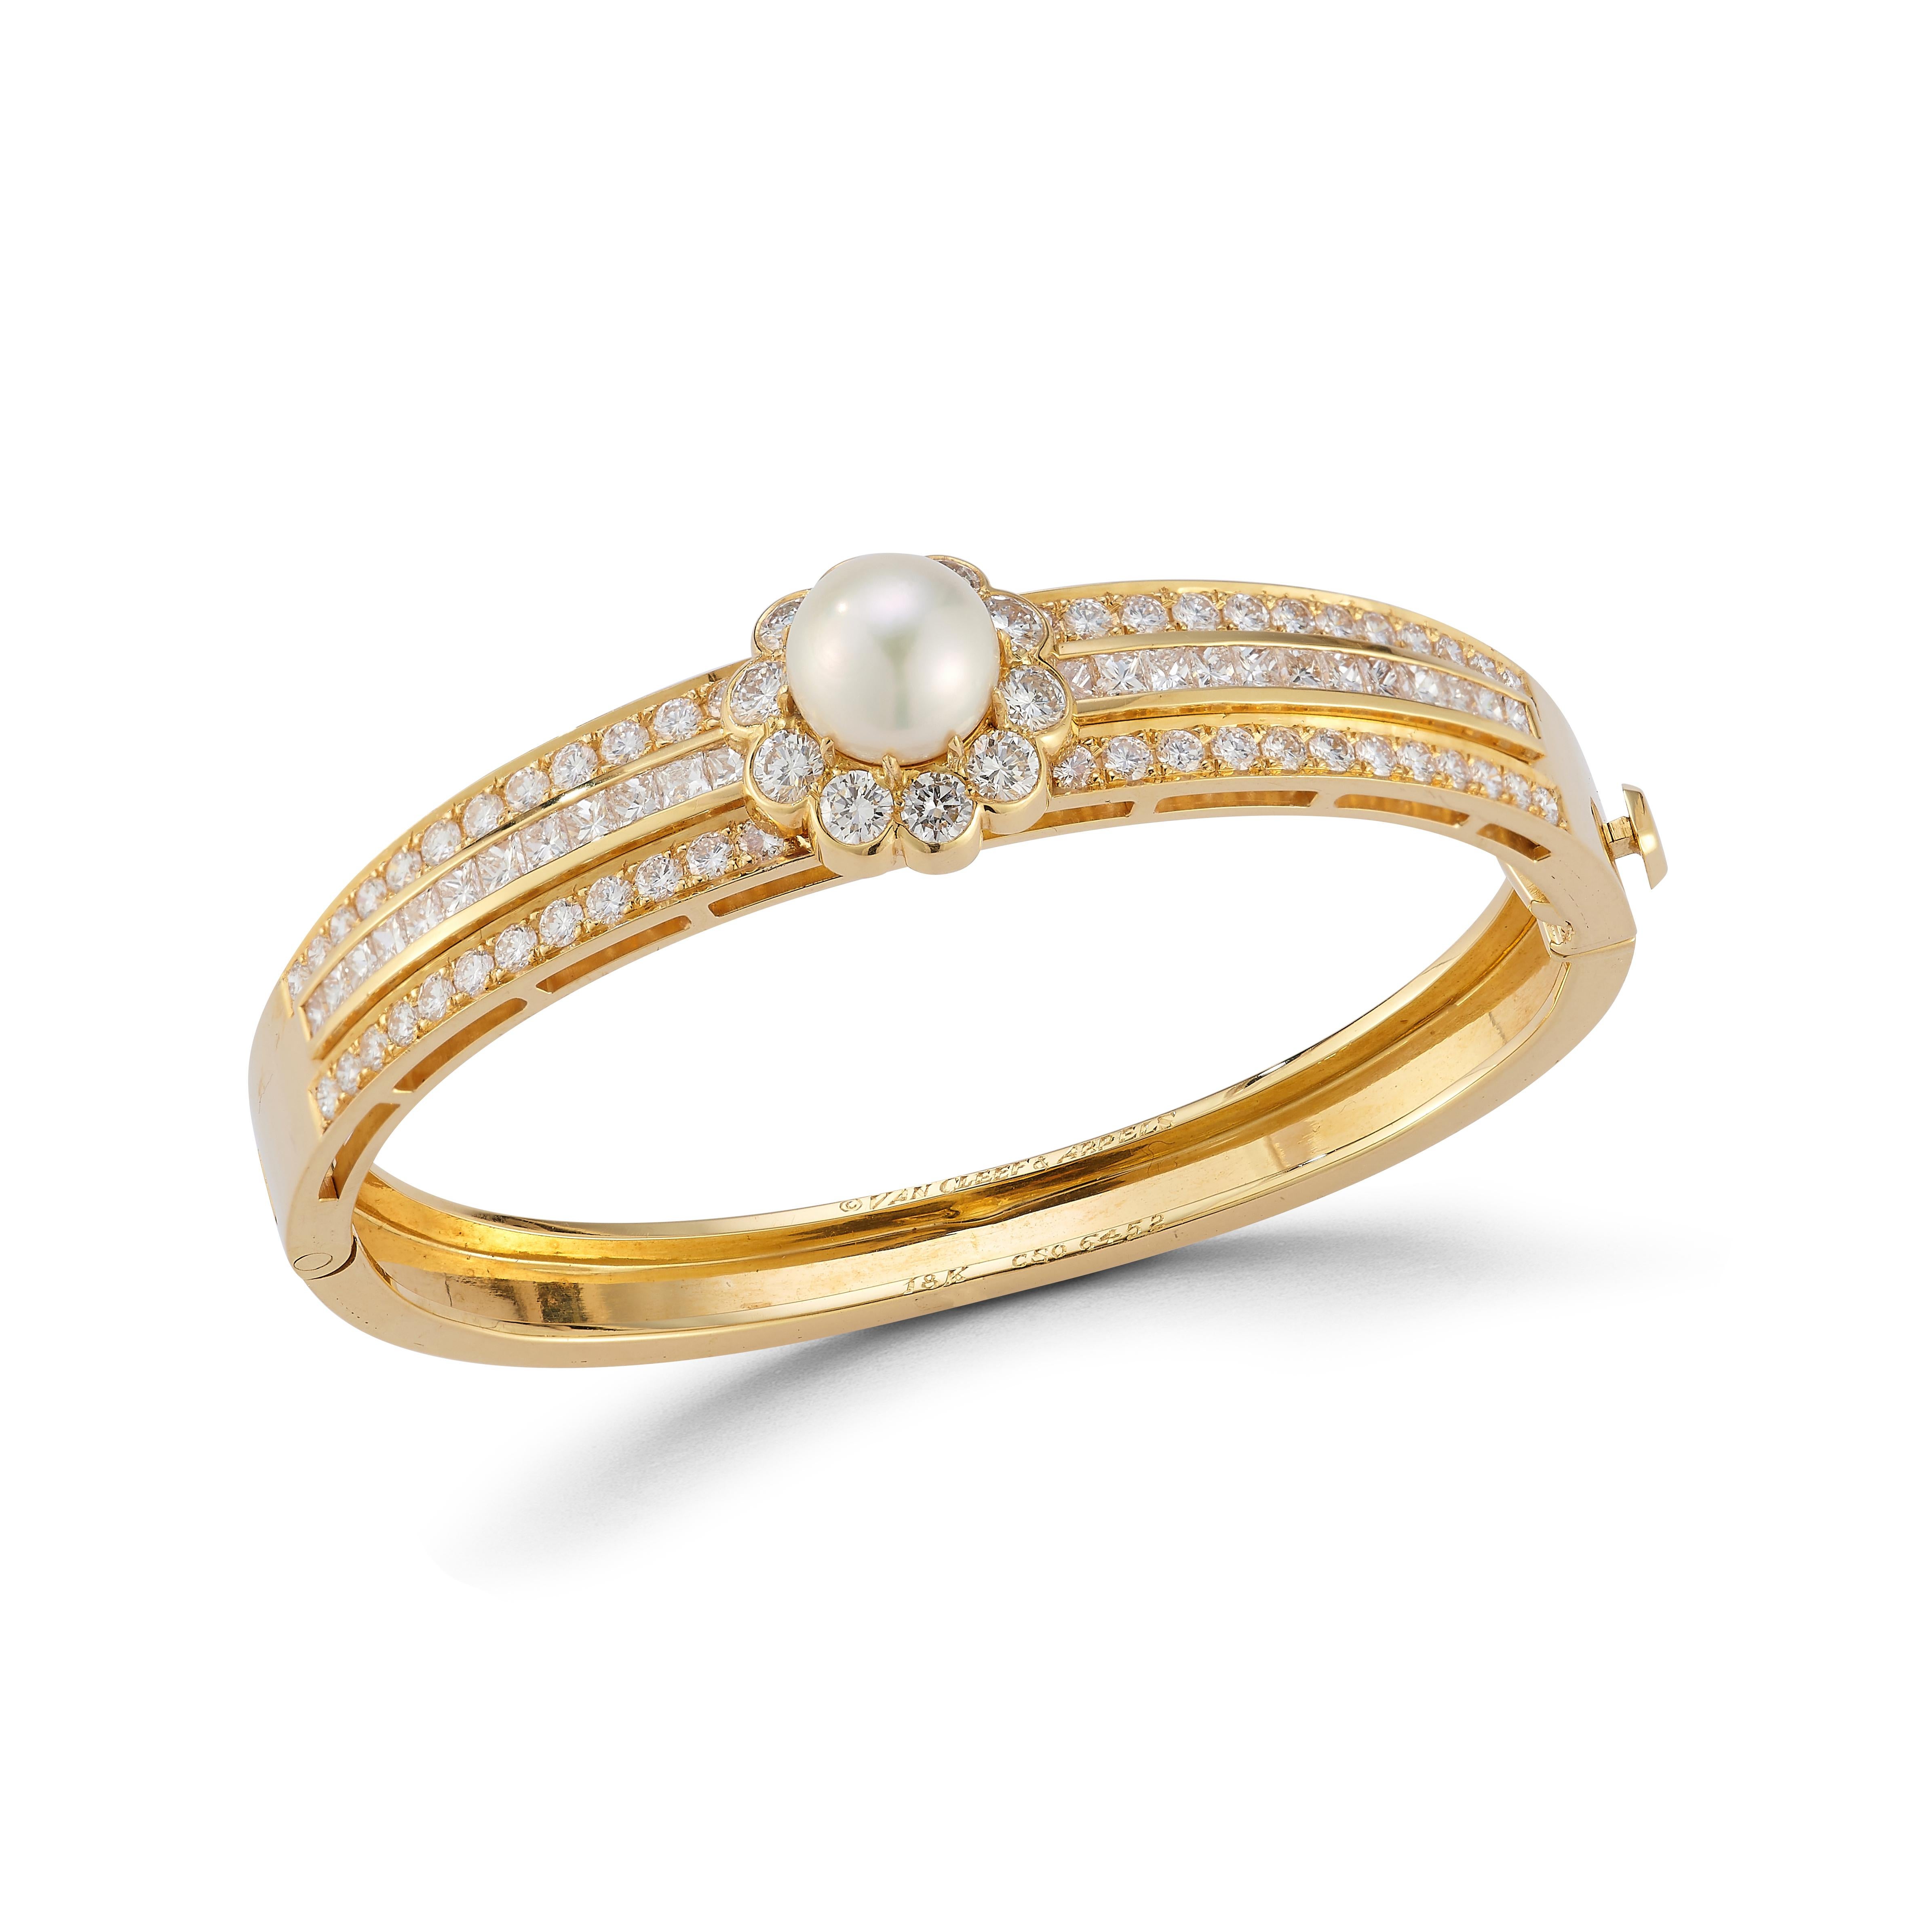 Van Cleef & Arpels Pearl & Diamond Bangle

An 18 karat yellow gold bangle set with a pearl in a halo of 10 round cut diamonds, flanked on either side by 48 round cut diamonds and 24 square cut diamonds

Signed Van Cleef & Arpels and numbered
Stamped